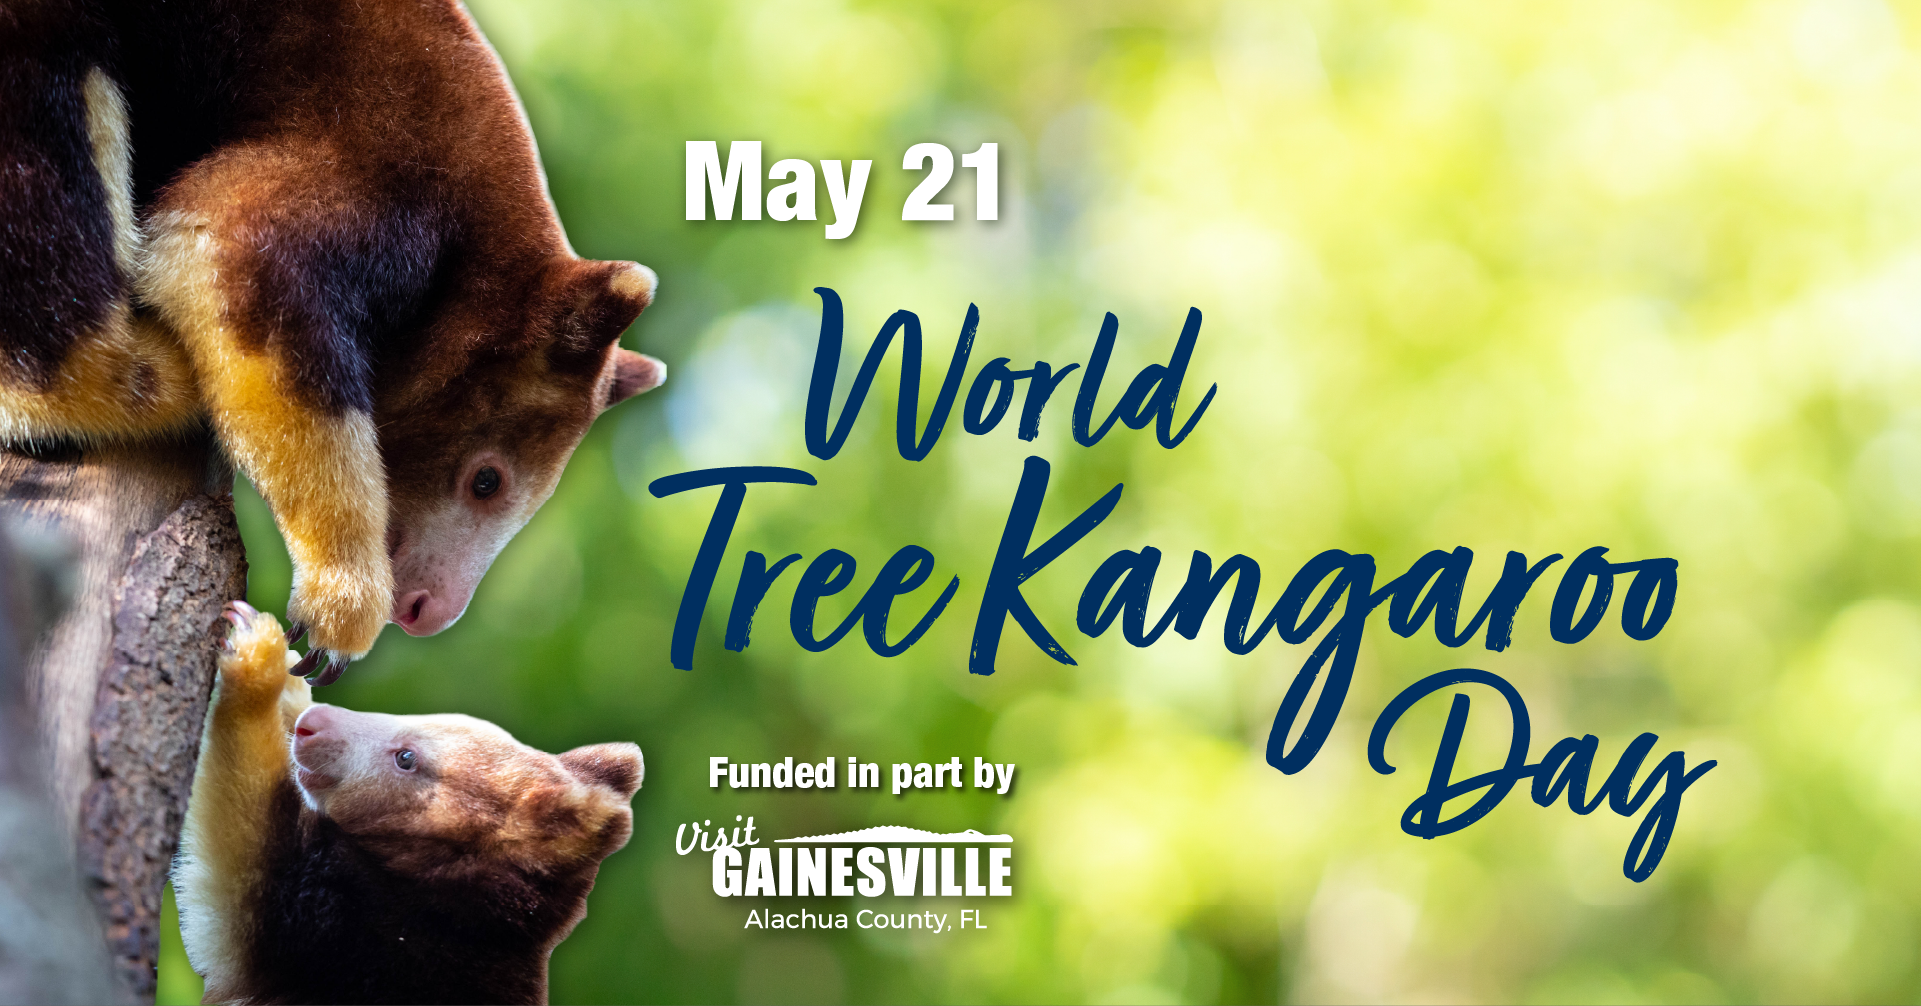 A tree kangaroo leans over to its baby. Caption: May 21 World Tree Kangaroo Day. VisitGainesville logo.